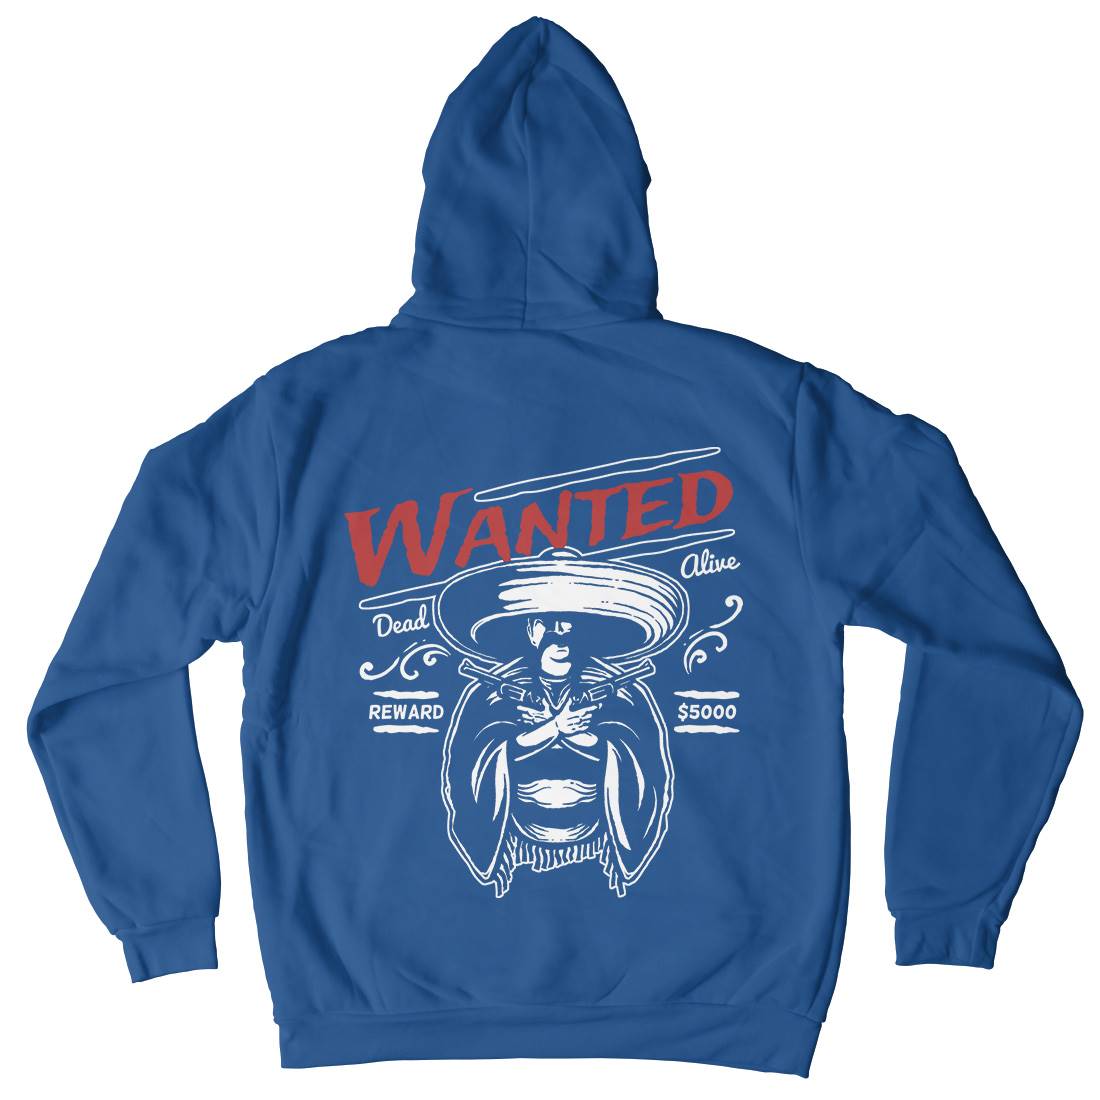 Wanted Kids Crew Neck Hoodie American A391